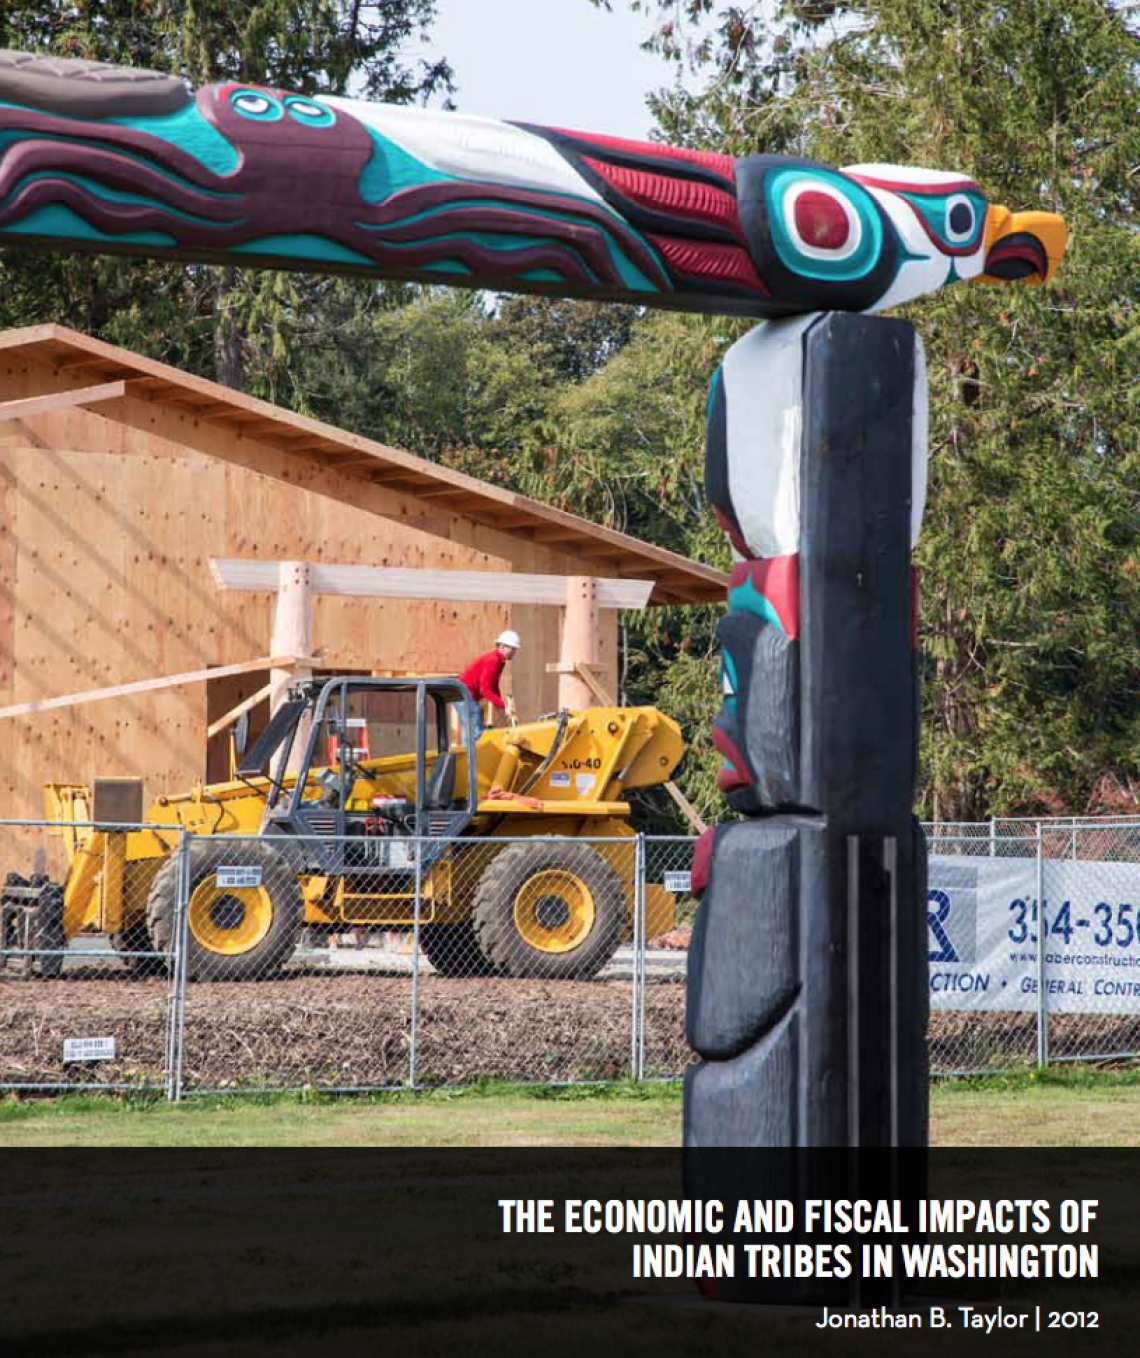 The Economic and Fiscal Impacts of Indian Tribes in Washington